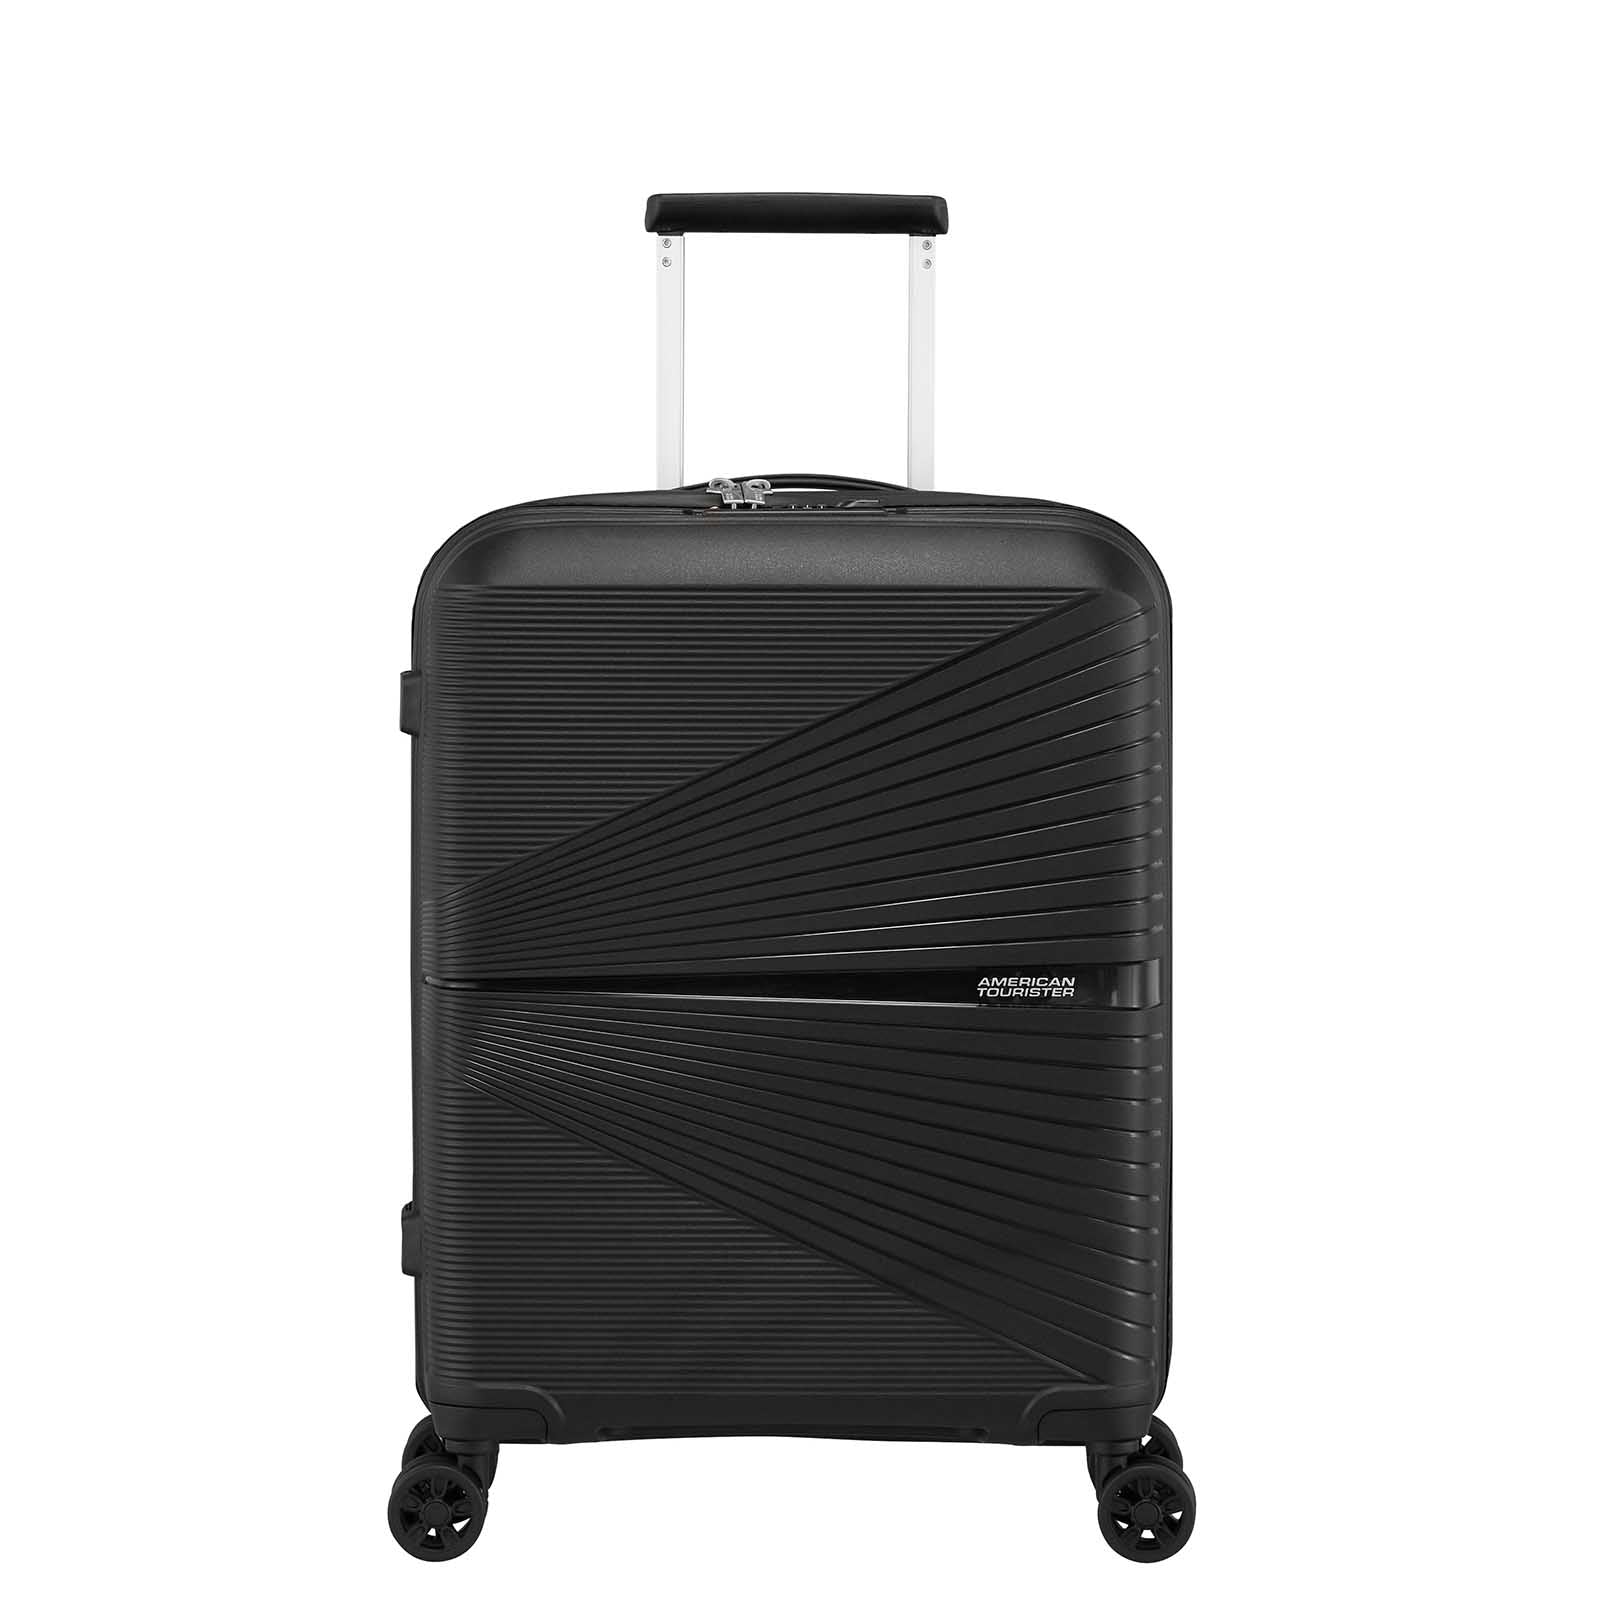 American-Tourister-Airconic-55cm-Carry-On-Suitcase-Onyx-Black-Front